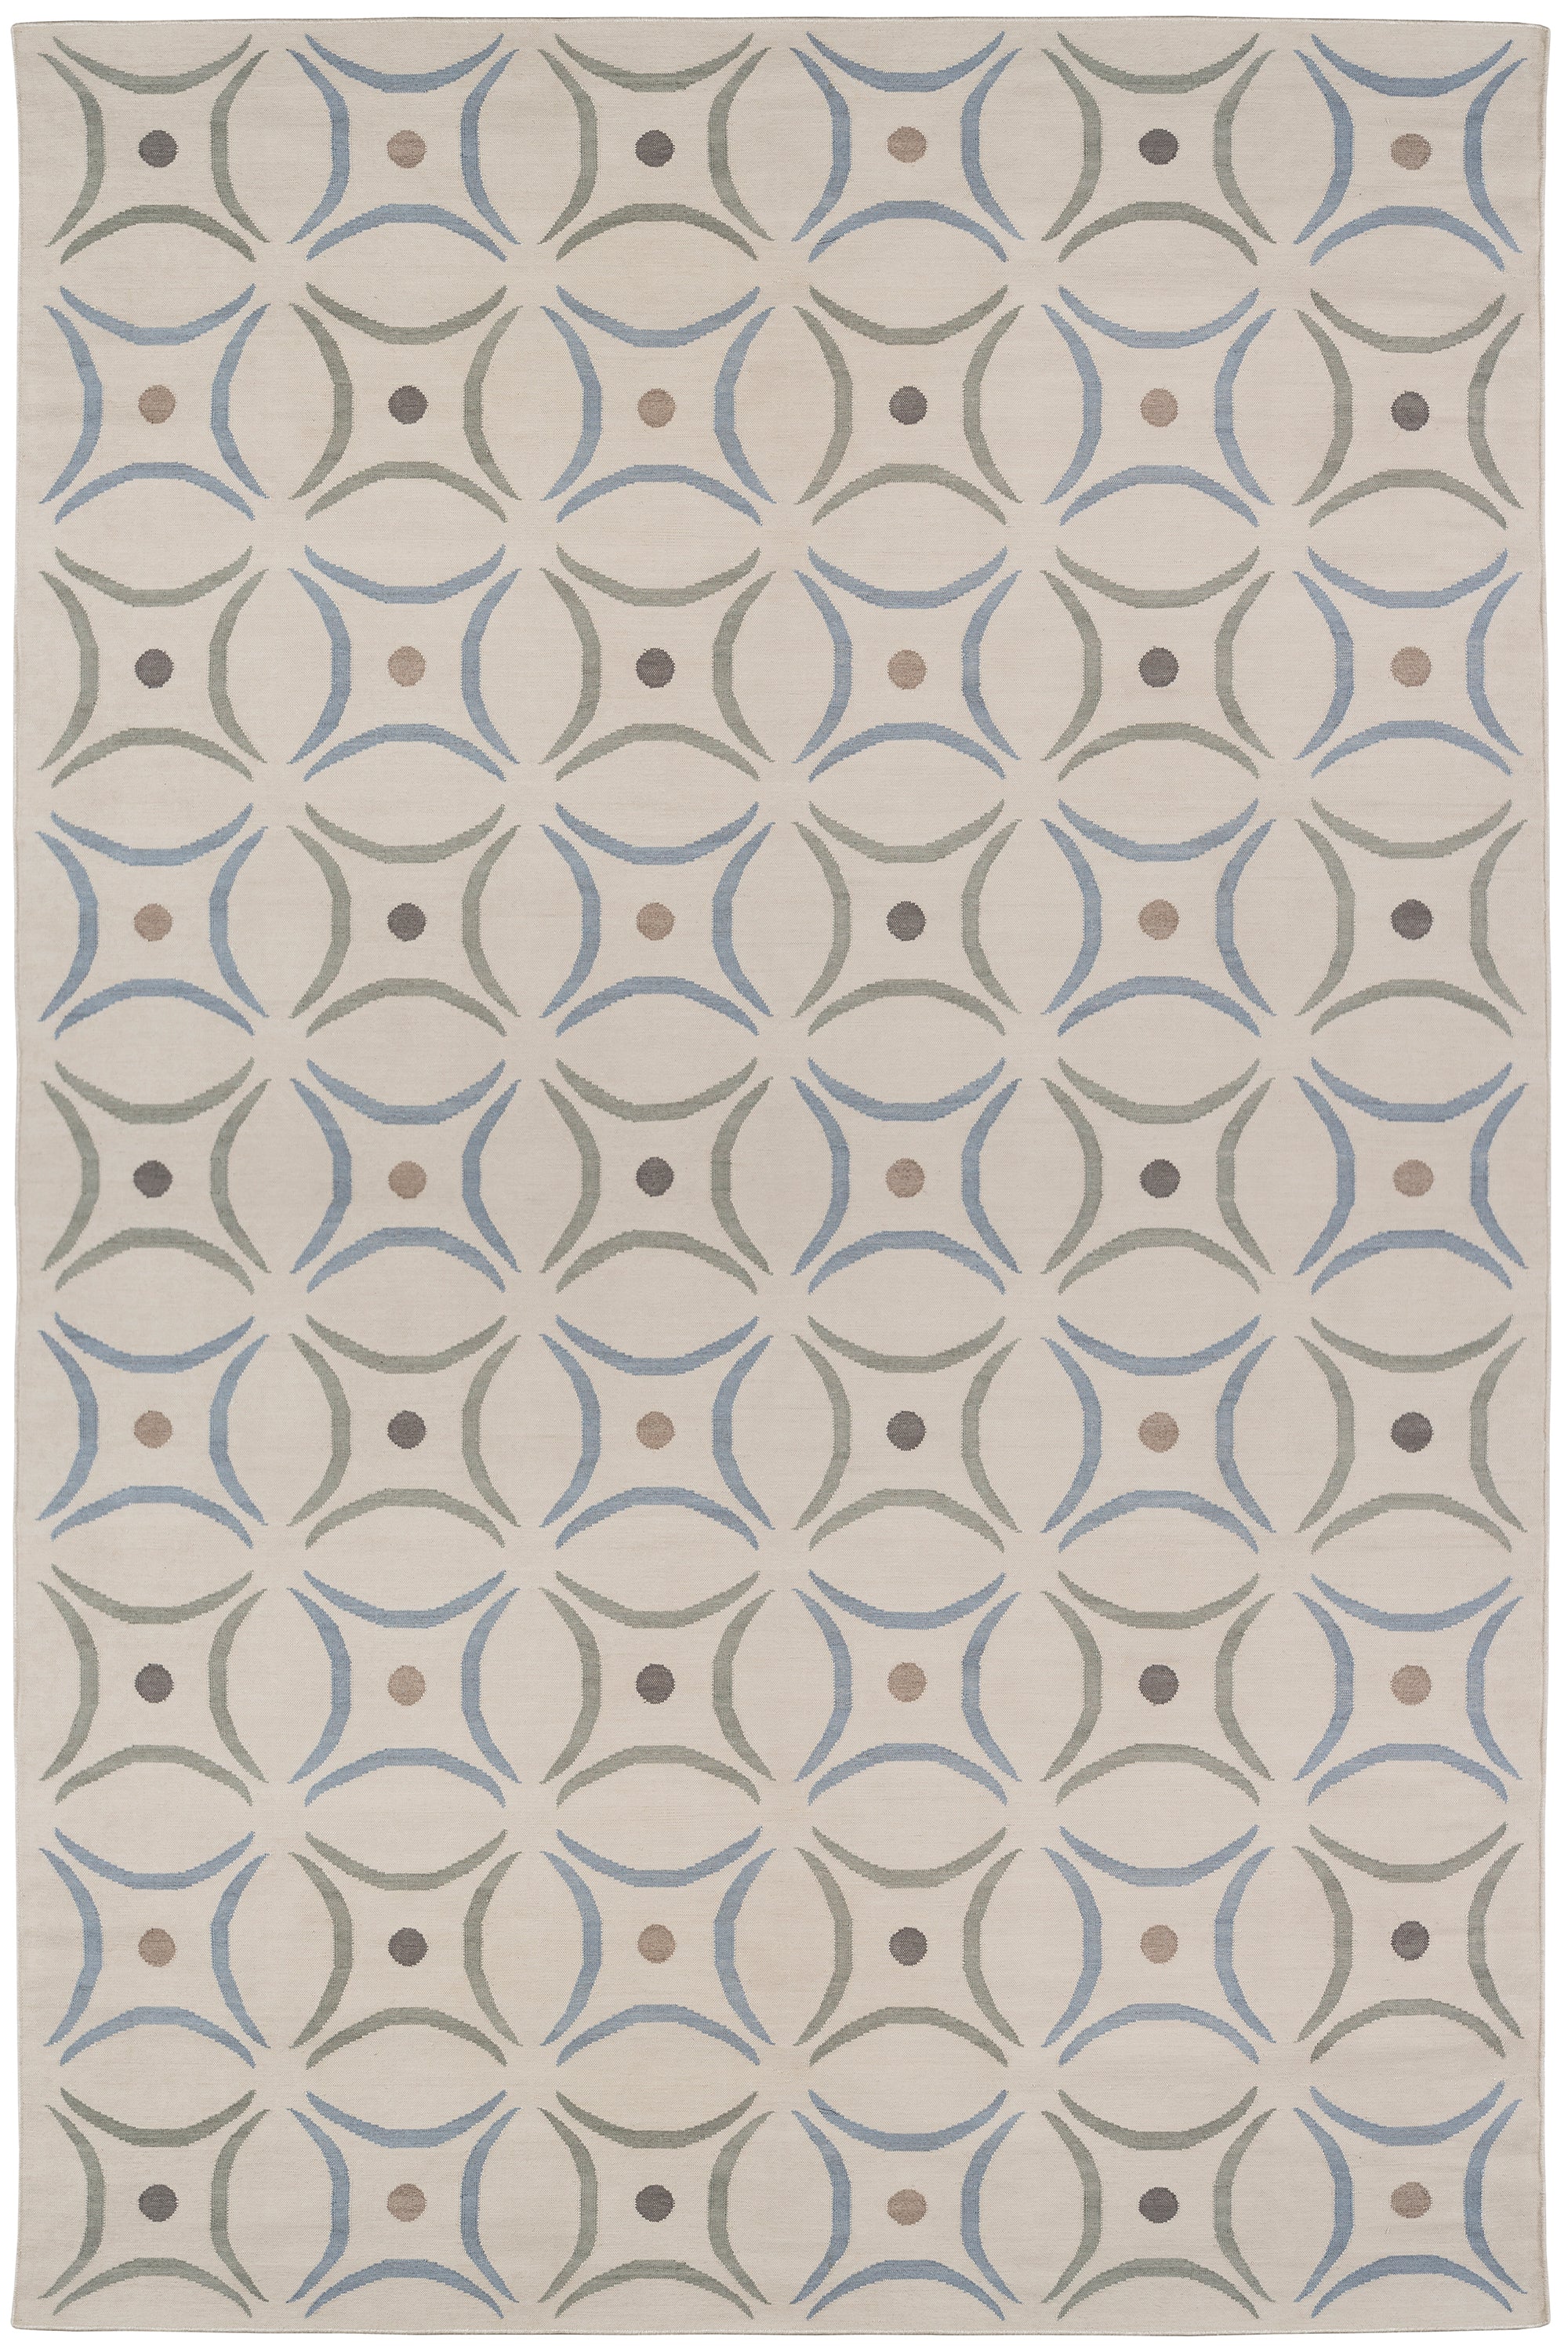 Full size Boe rug in Genoa, featuring a pattern of curved segments in light blue and sage green with taupe circles on an ivory field. 